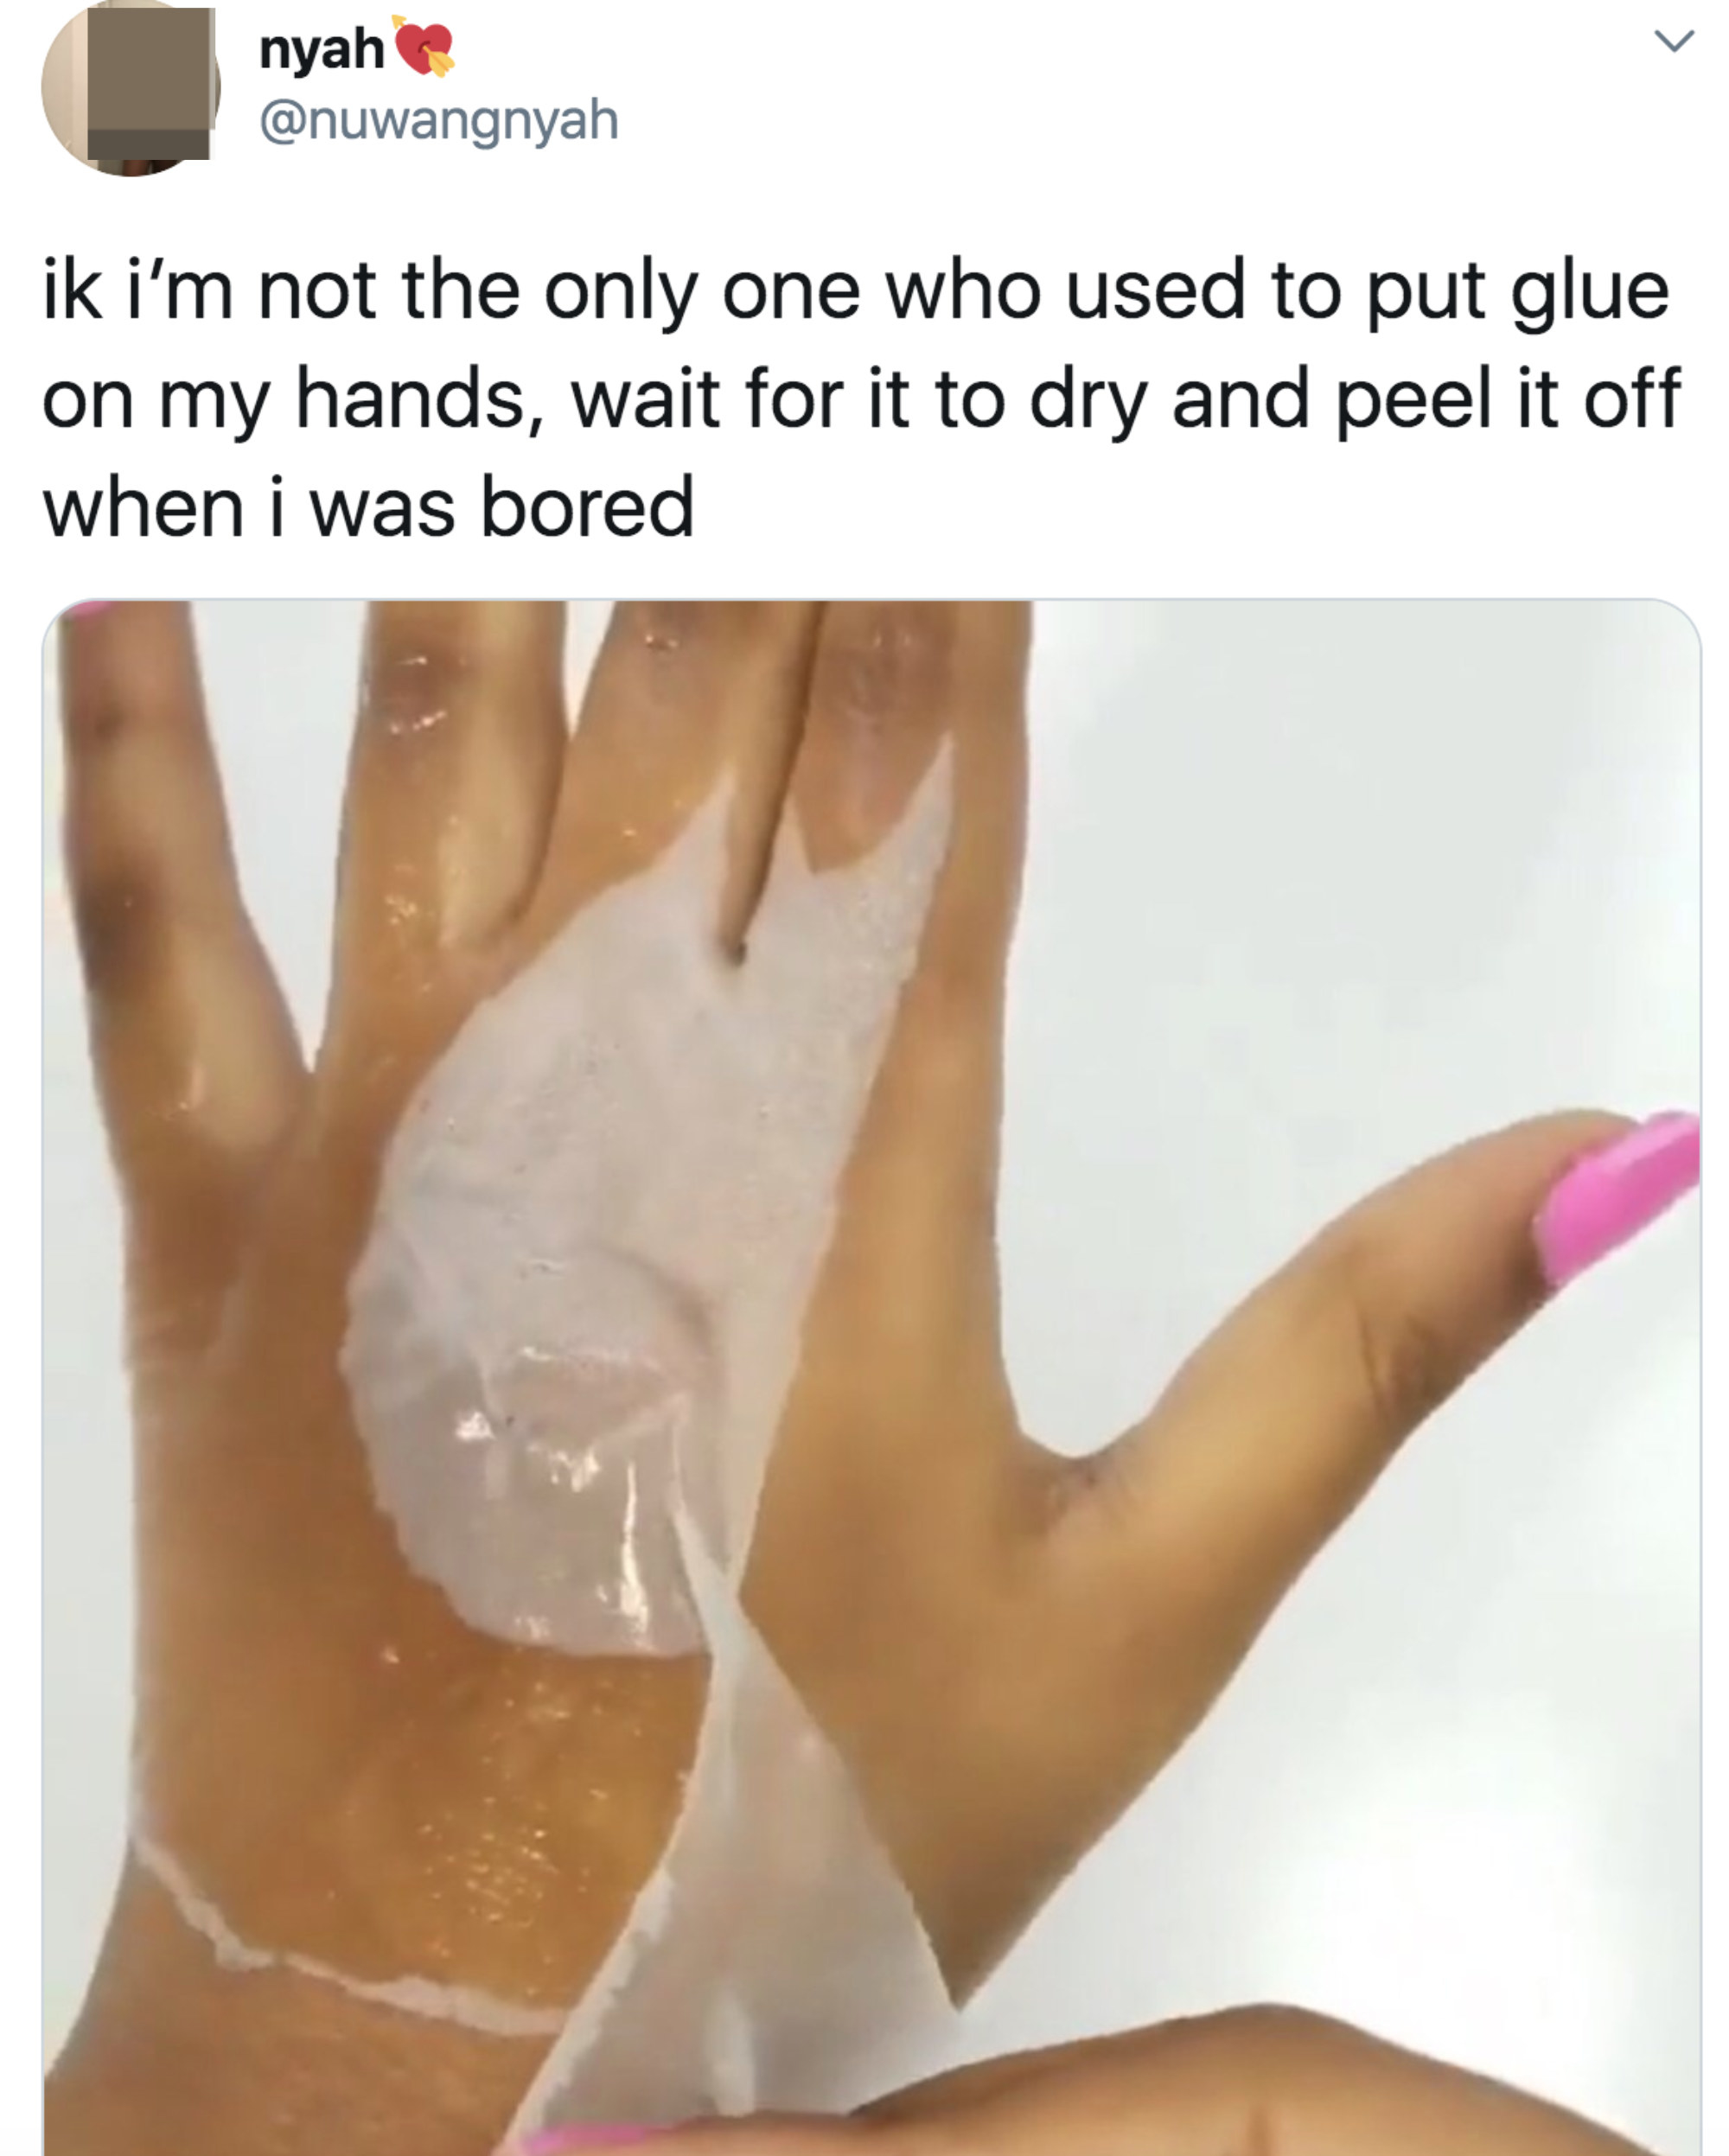 Tweet with a picture of someone peeling glue with the text &quot;IK I’m not the only one who used to put glue on my hands, wait for it to dry, and peel it off when I was bored&quot;